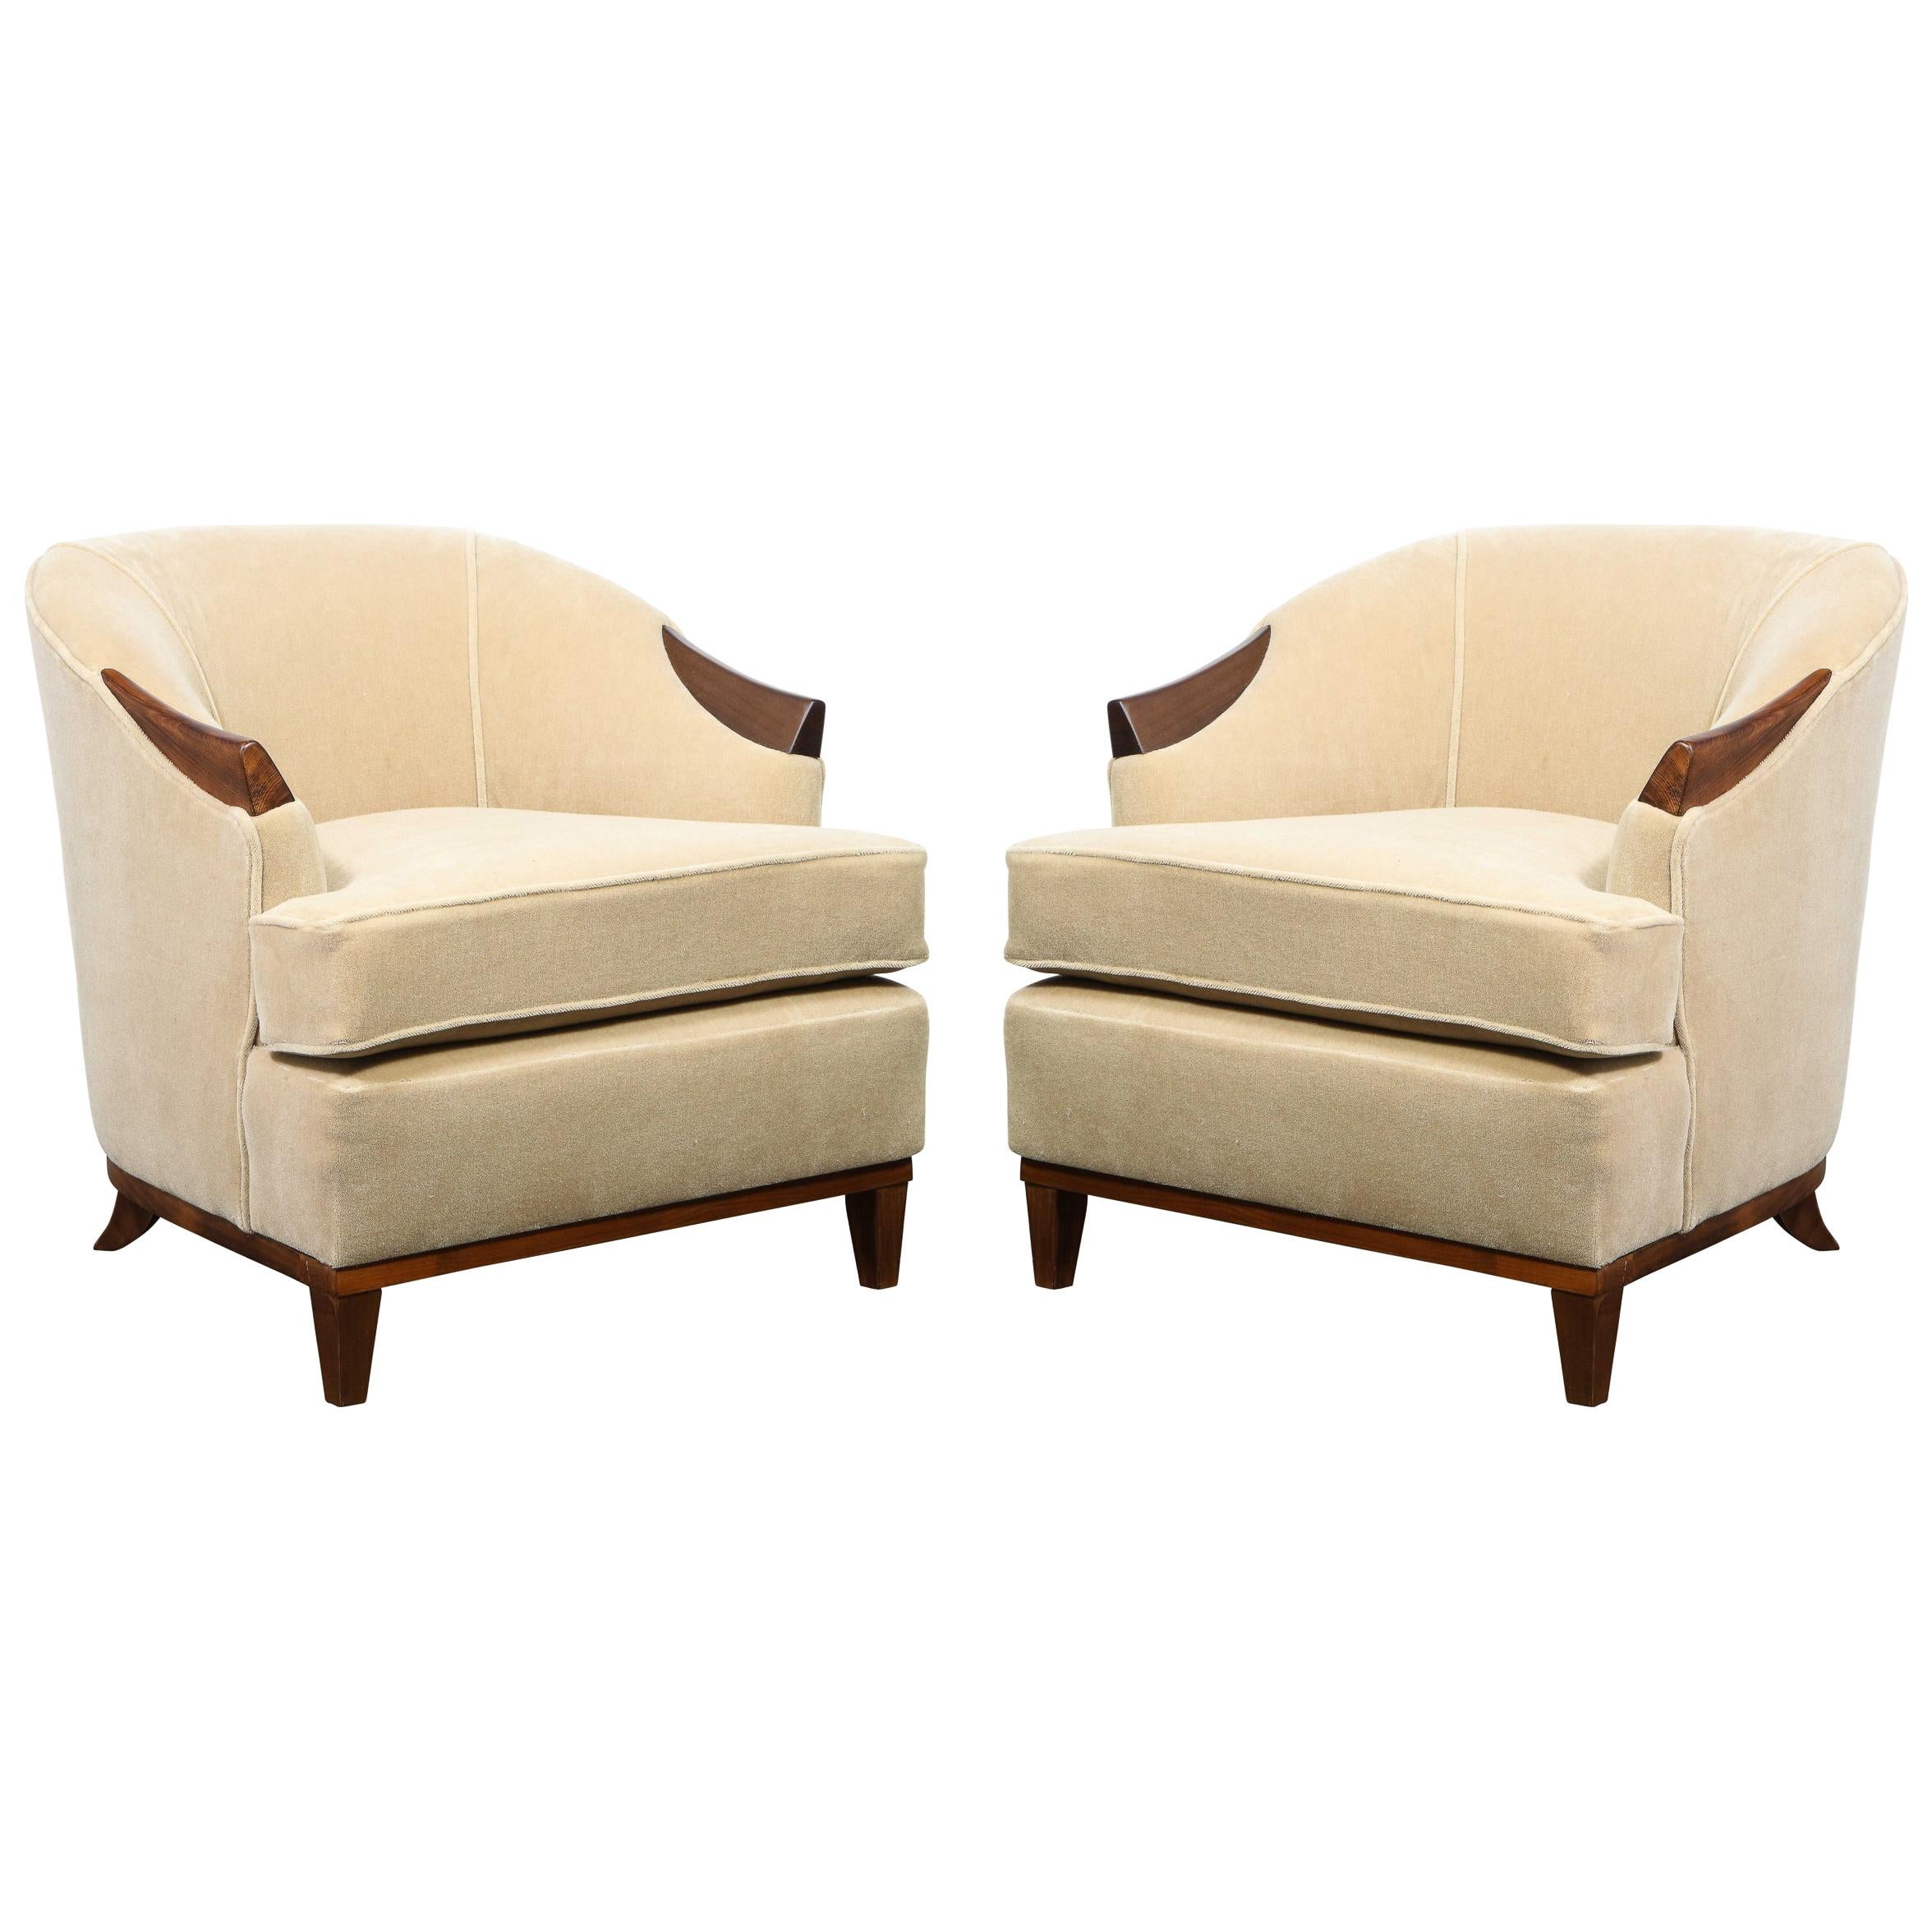 Pair of 1950s American Mid-Century Modern Ecru Mohair and Walnut Armchairs